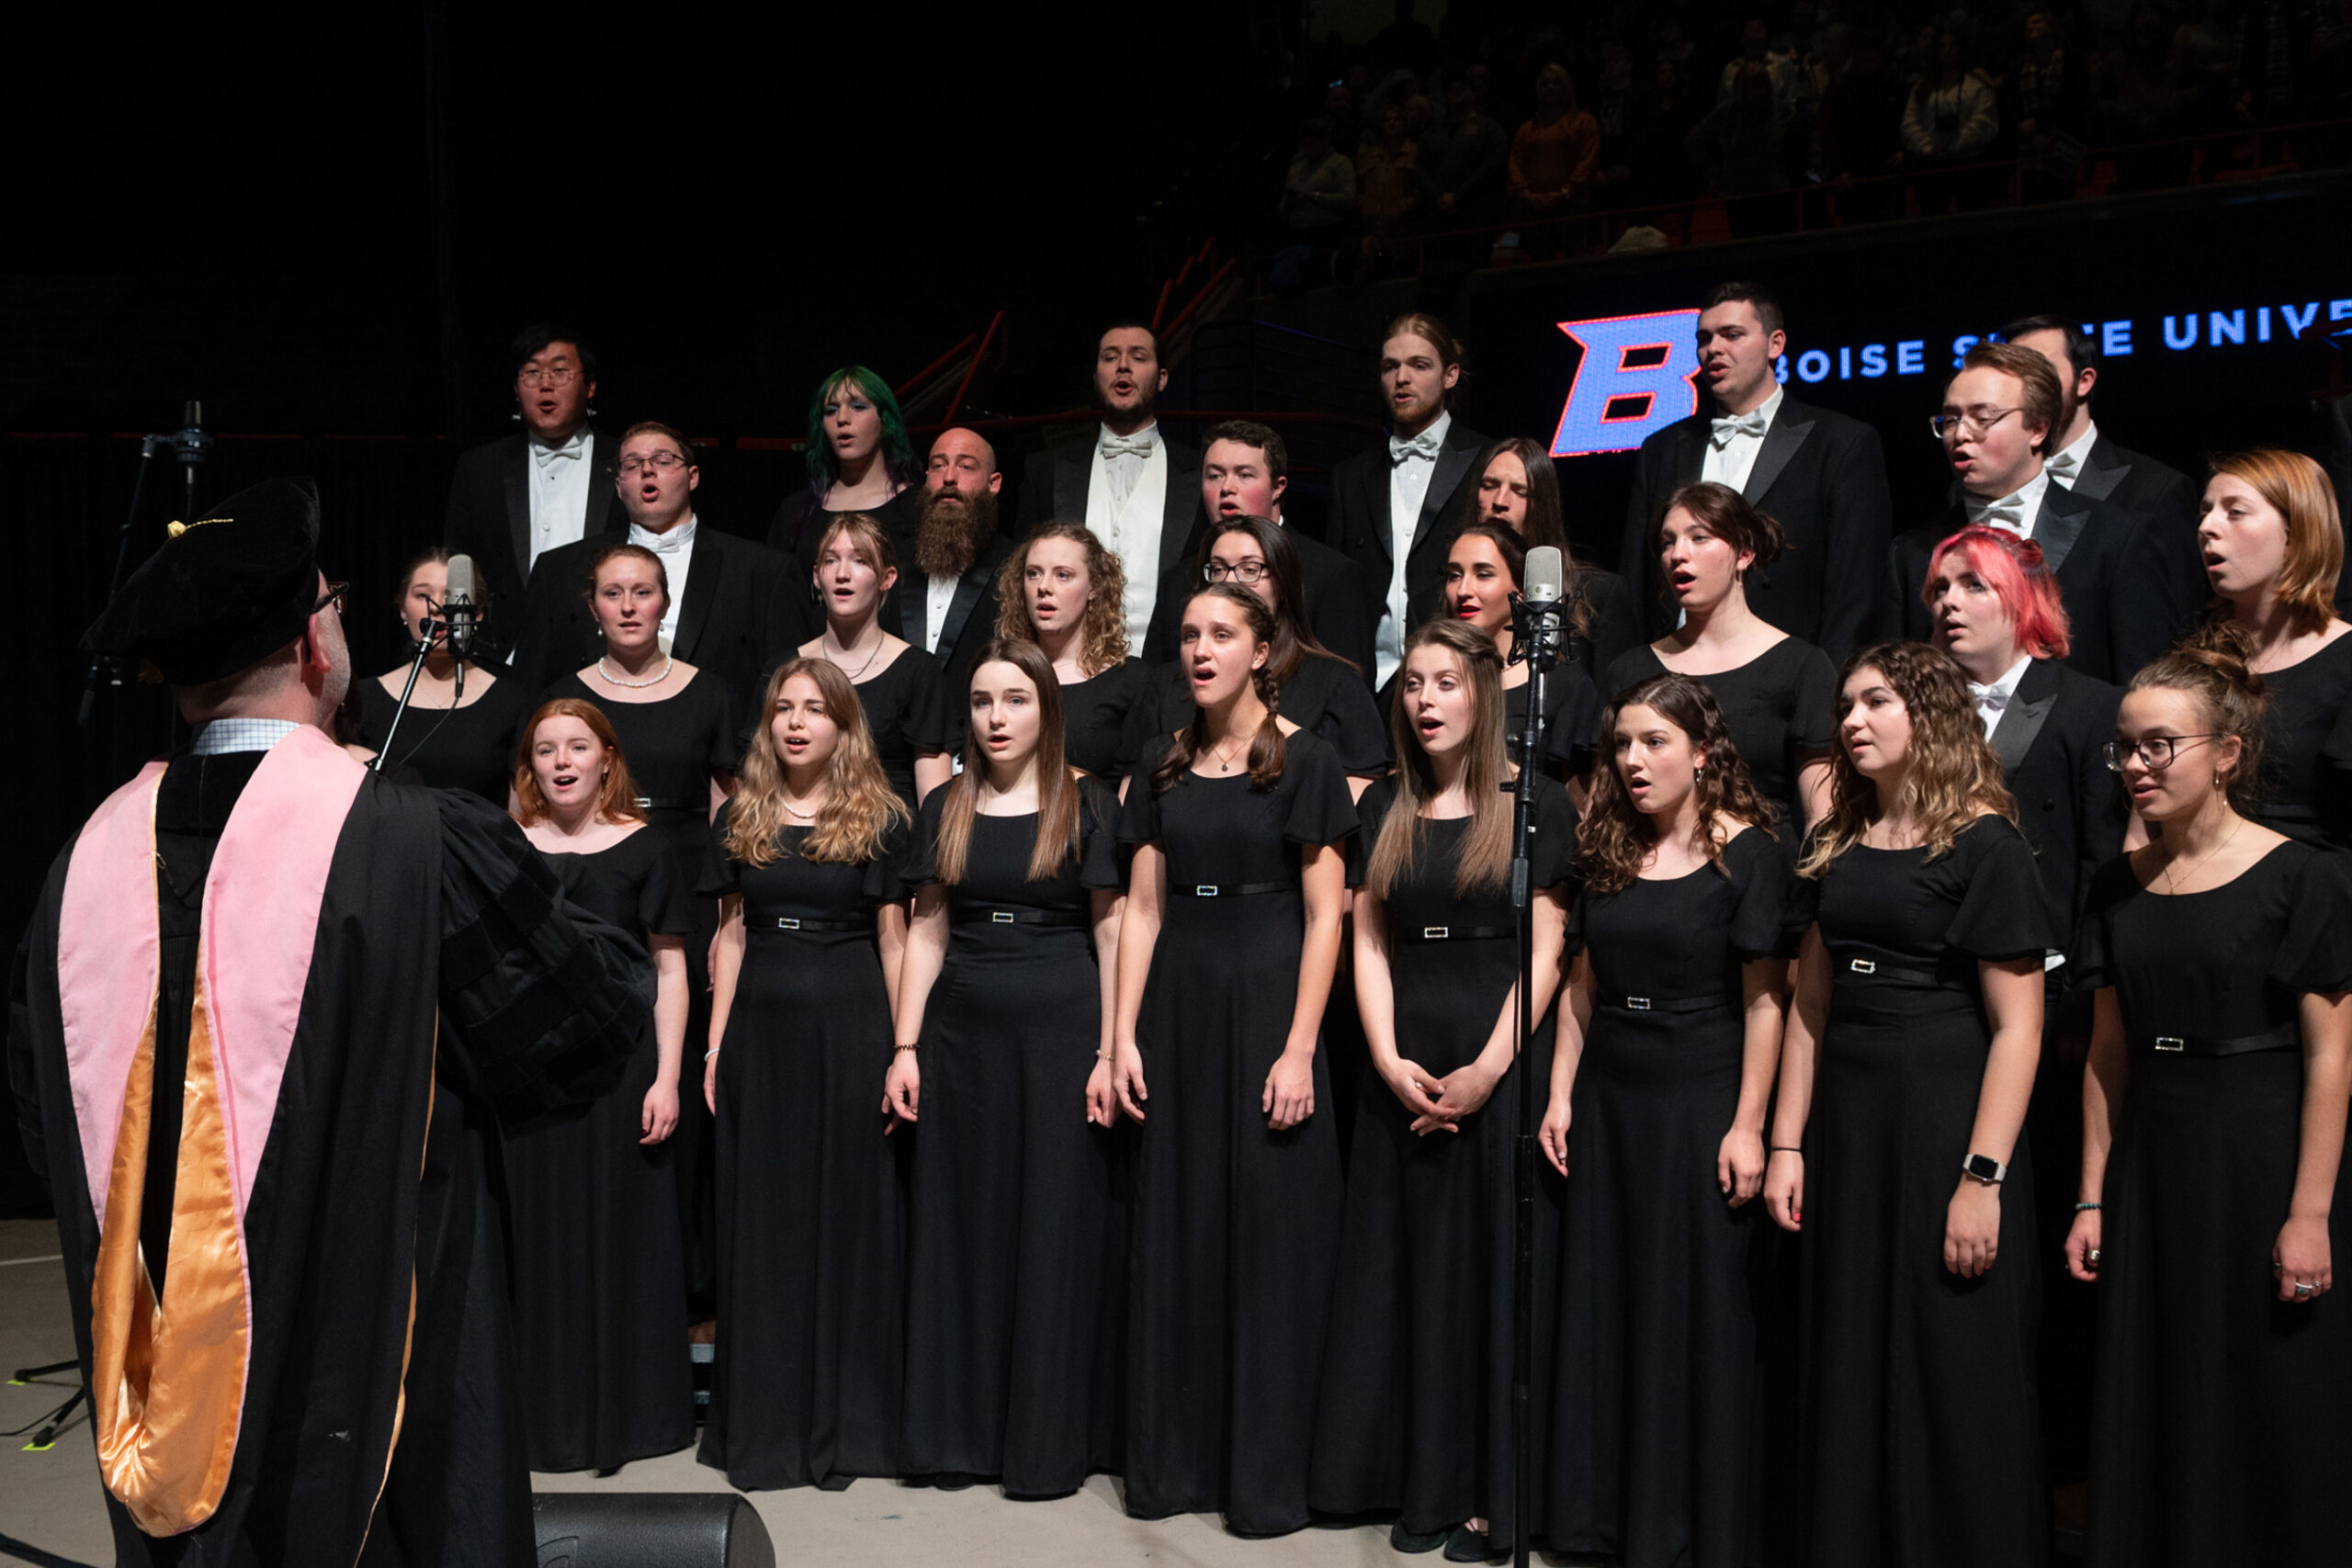 Meistersingers performing at the 2022 Boise State graduation ceremony.